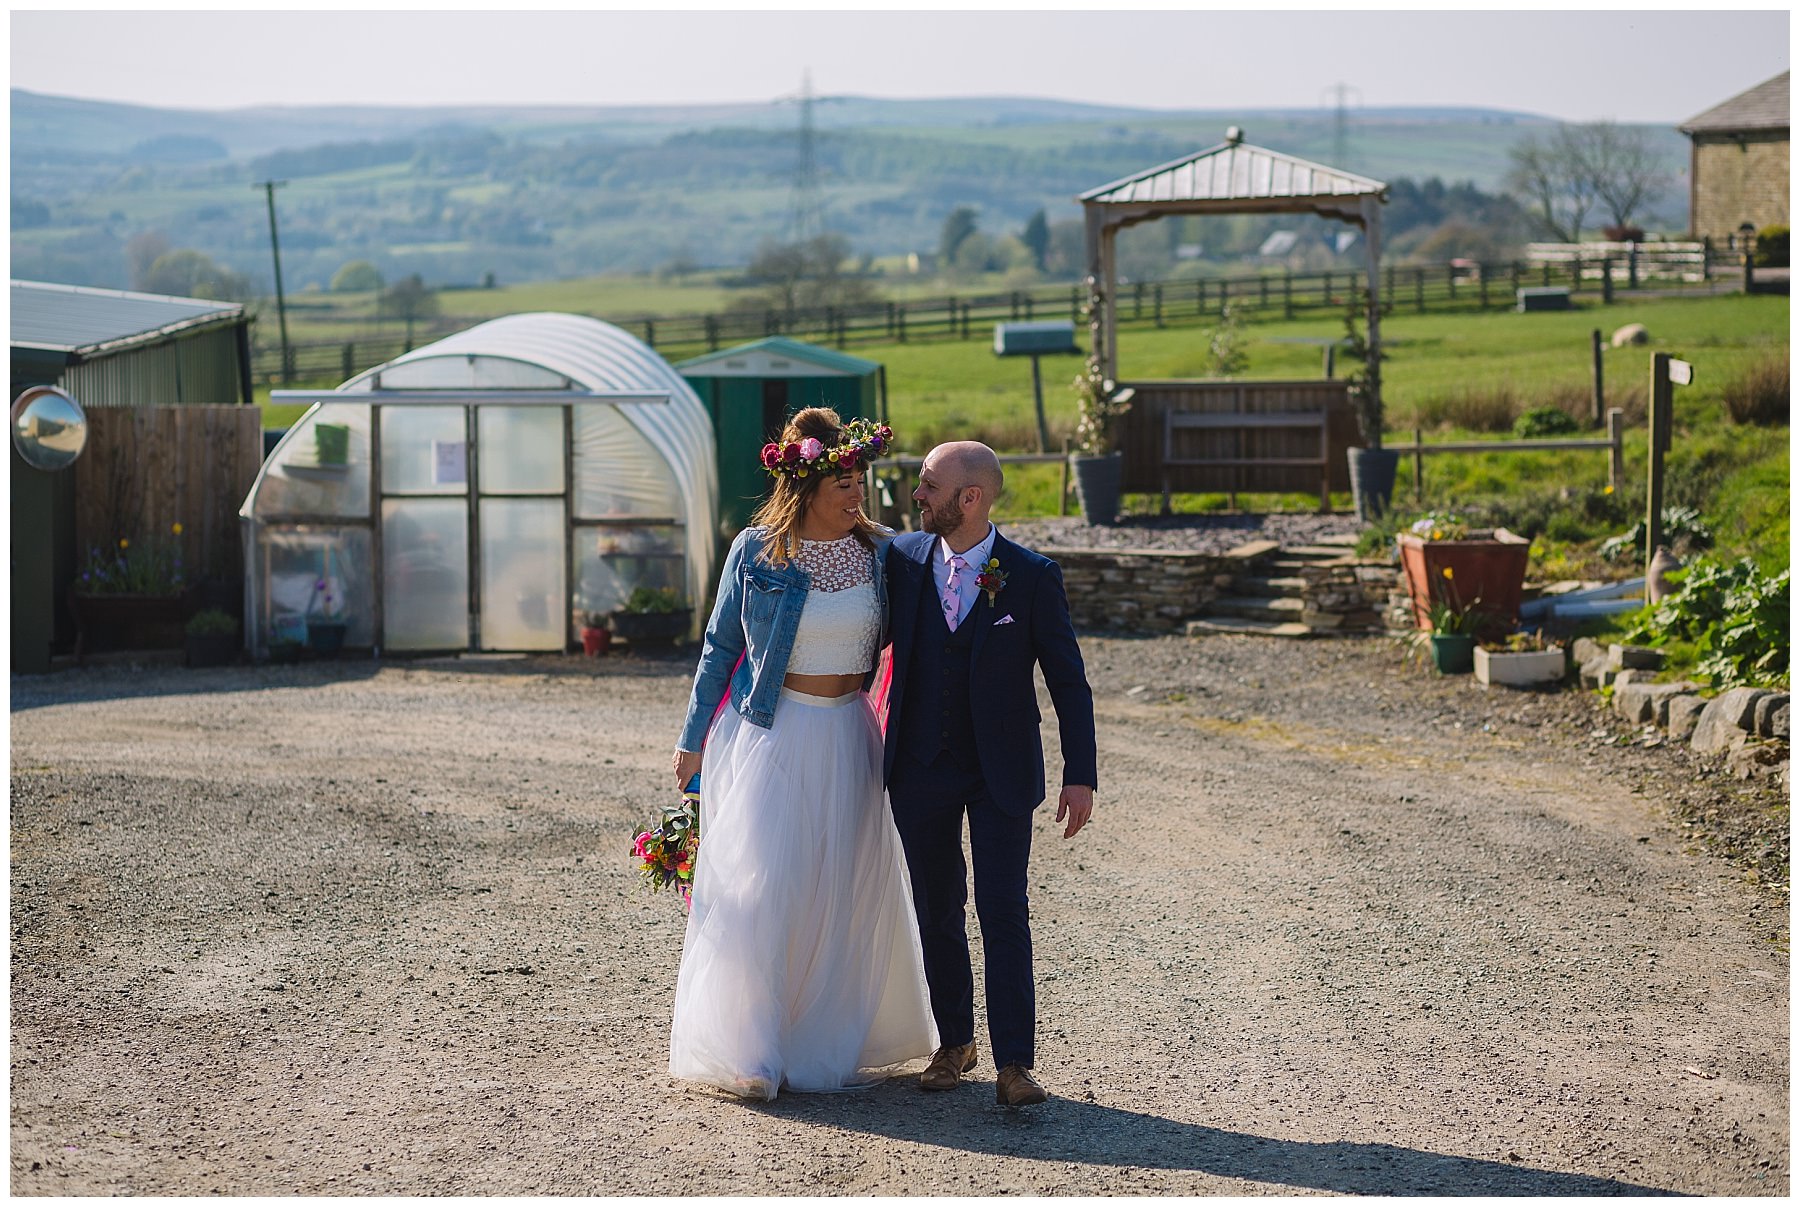 Bride and groom wander through the grounds of the wellbeing farm